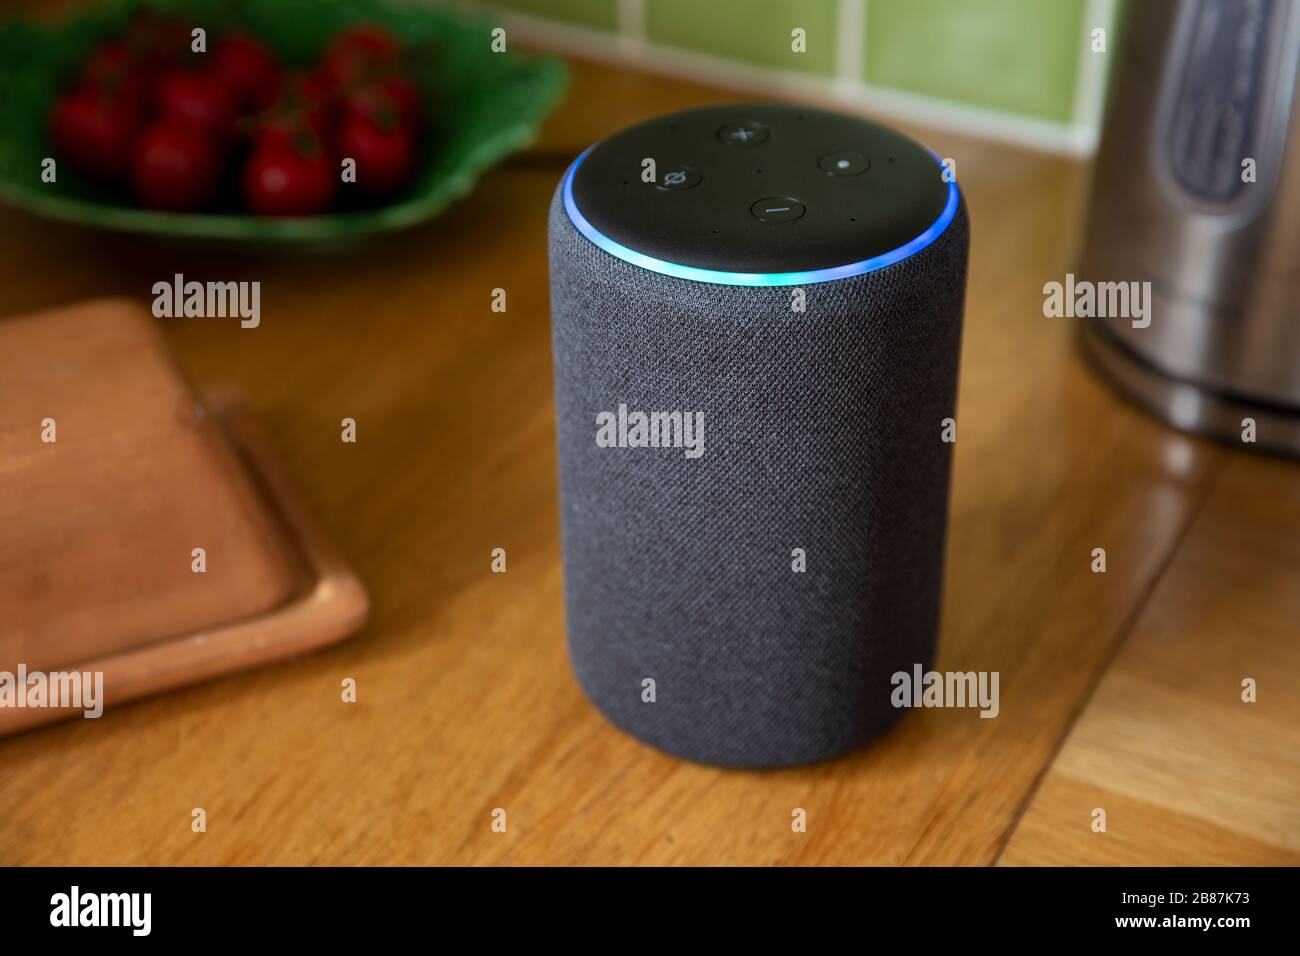 BATH, UK - MARCH 20, 2020 : Close up of a 3rd generation Amazon Echo smart speaker glowing blue on a kitchen worktop Stock Photo